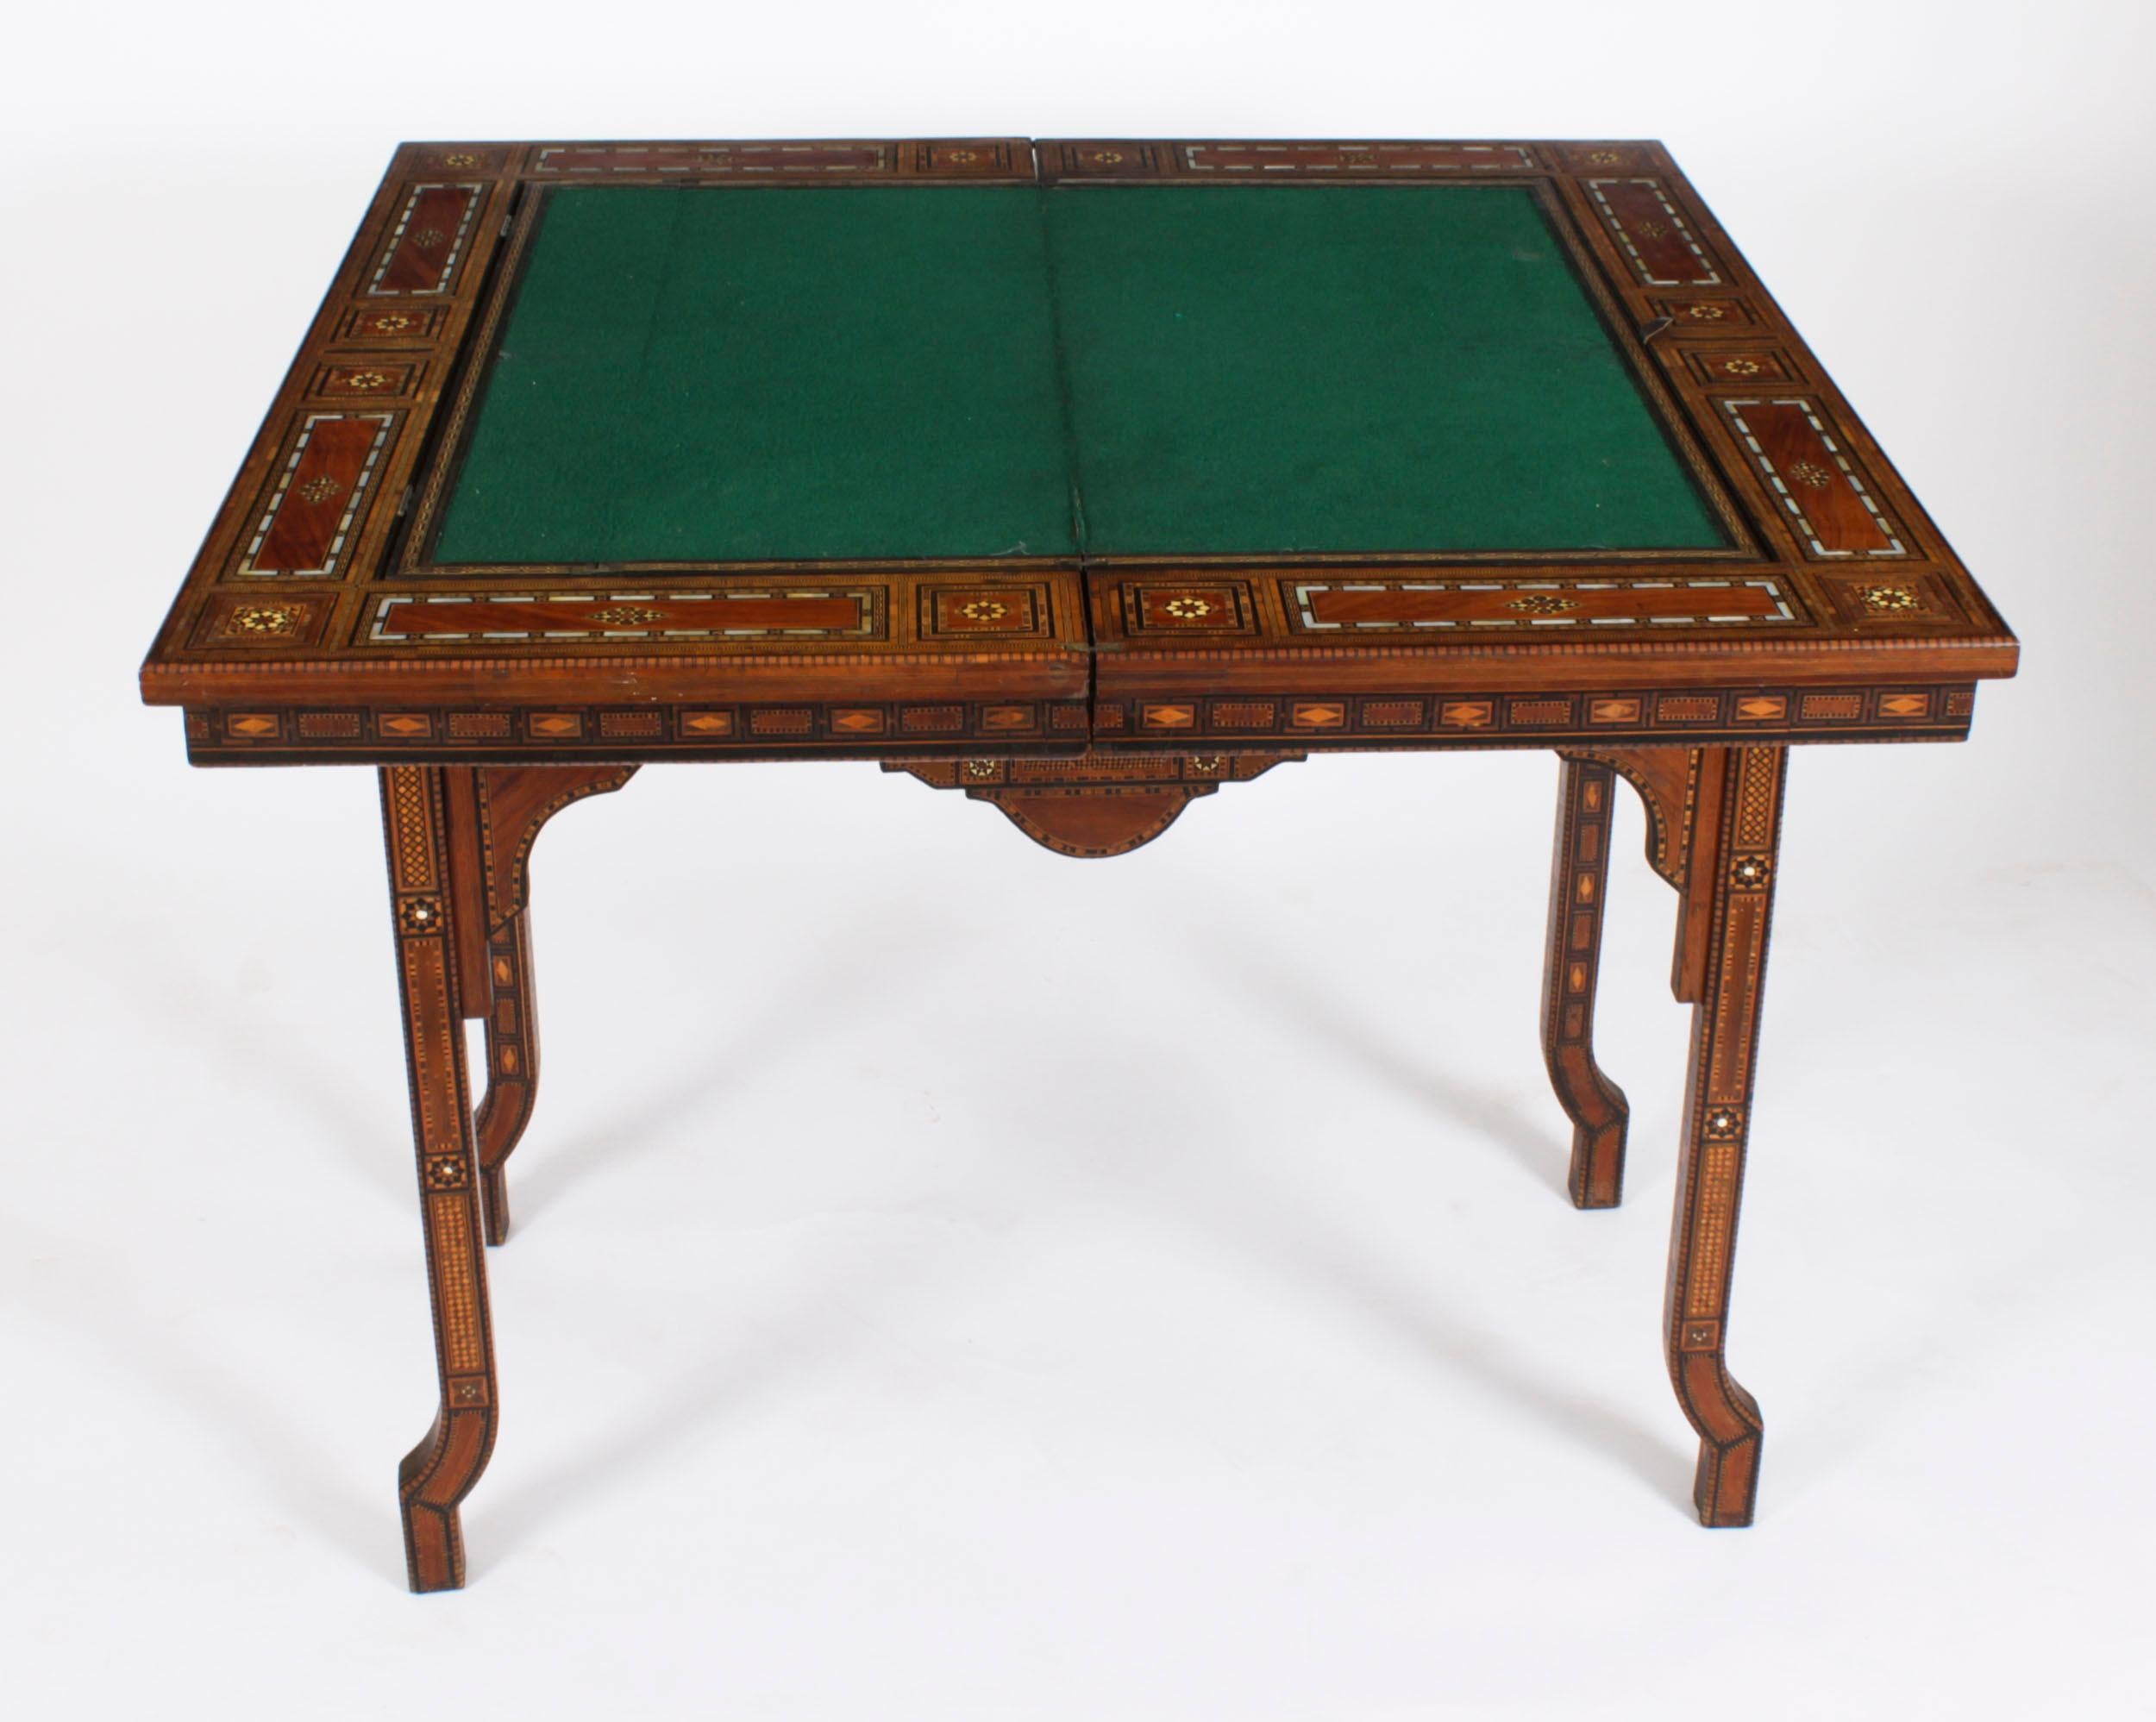 Antique Damascus Syrian Inlaid Card, Chess, Backgammon, Games table C1900 For Sale 7